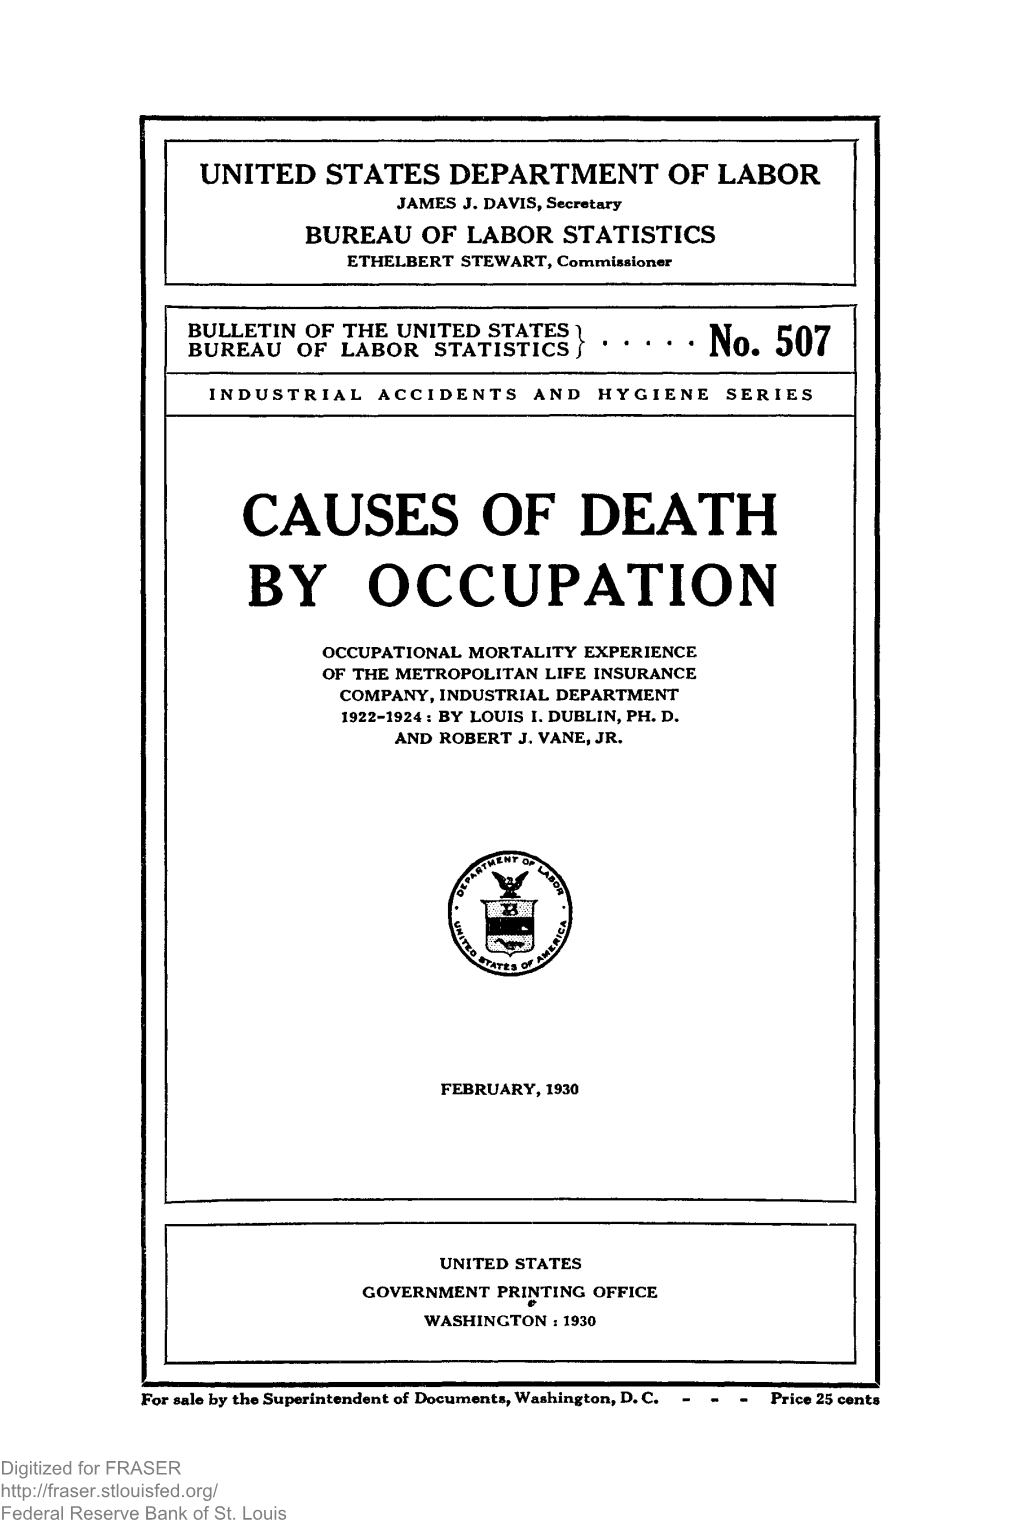 Causes of Death by Occupation